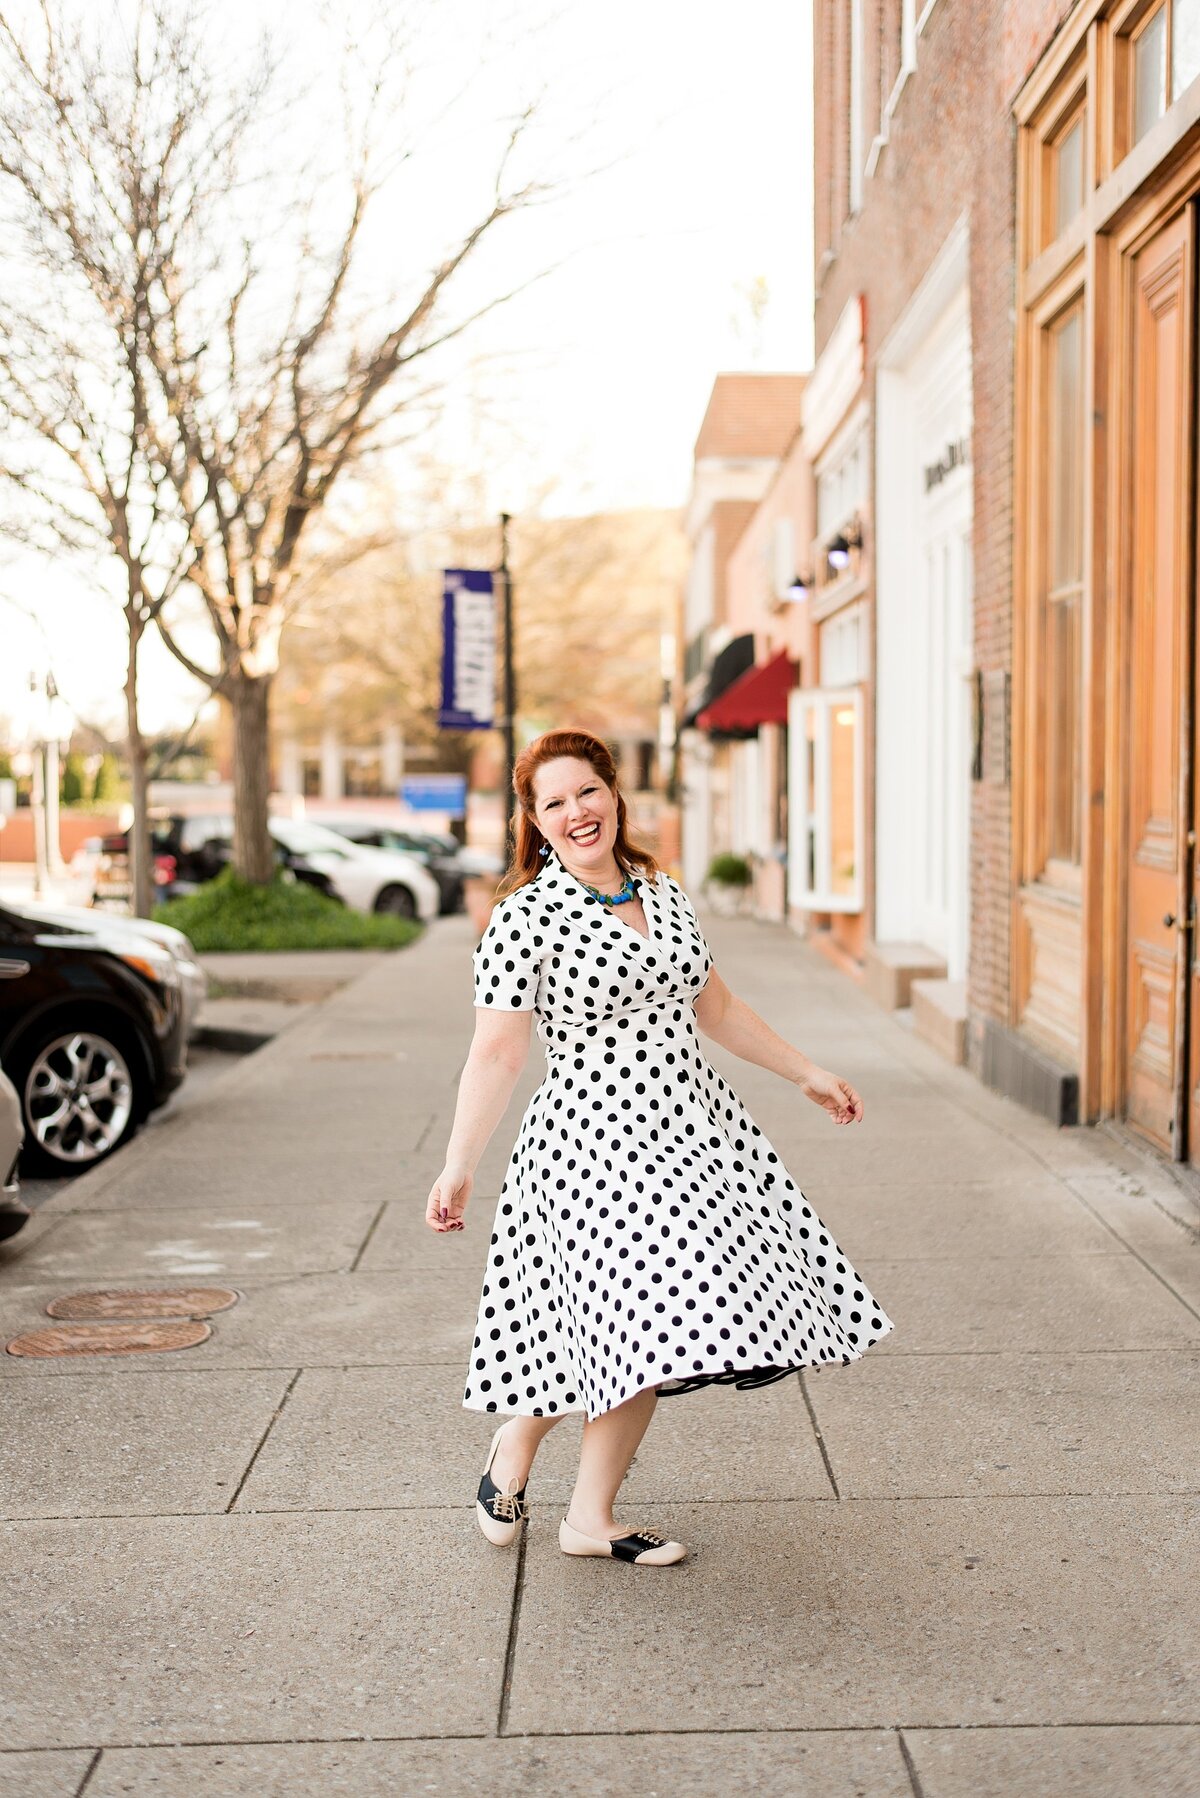 Wedding planner wearing black and white polka dot dress spinning outside and laughing